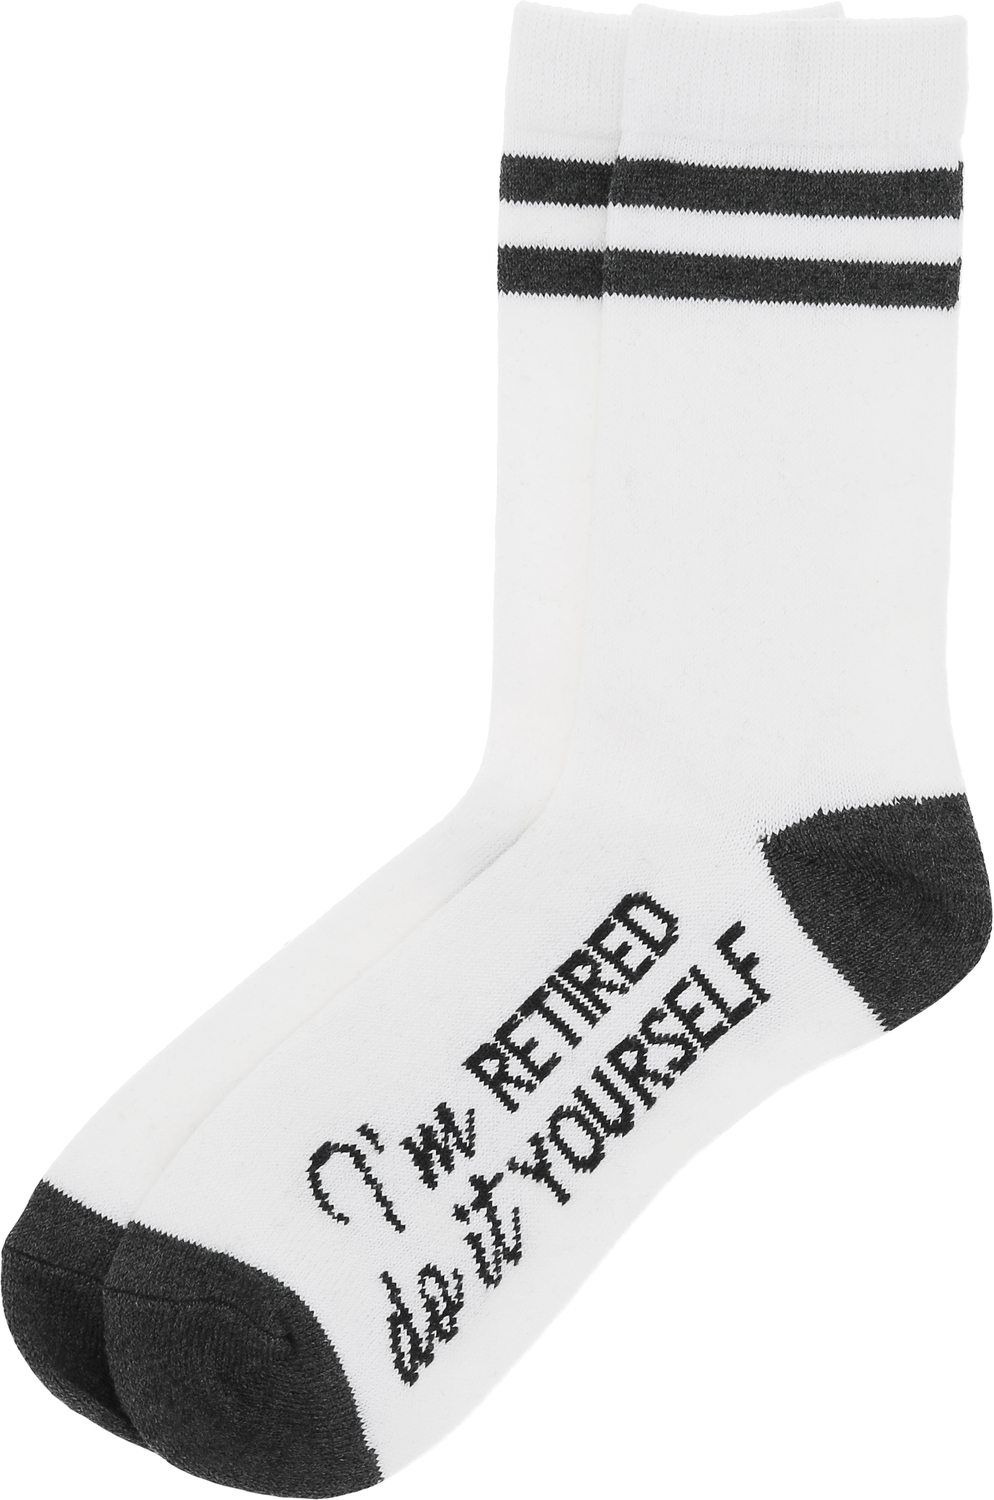 Do It Yourself by Retired Life - Do It Yourself - S/M Crew Socks